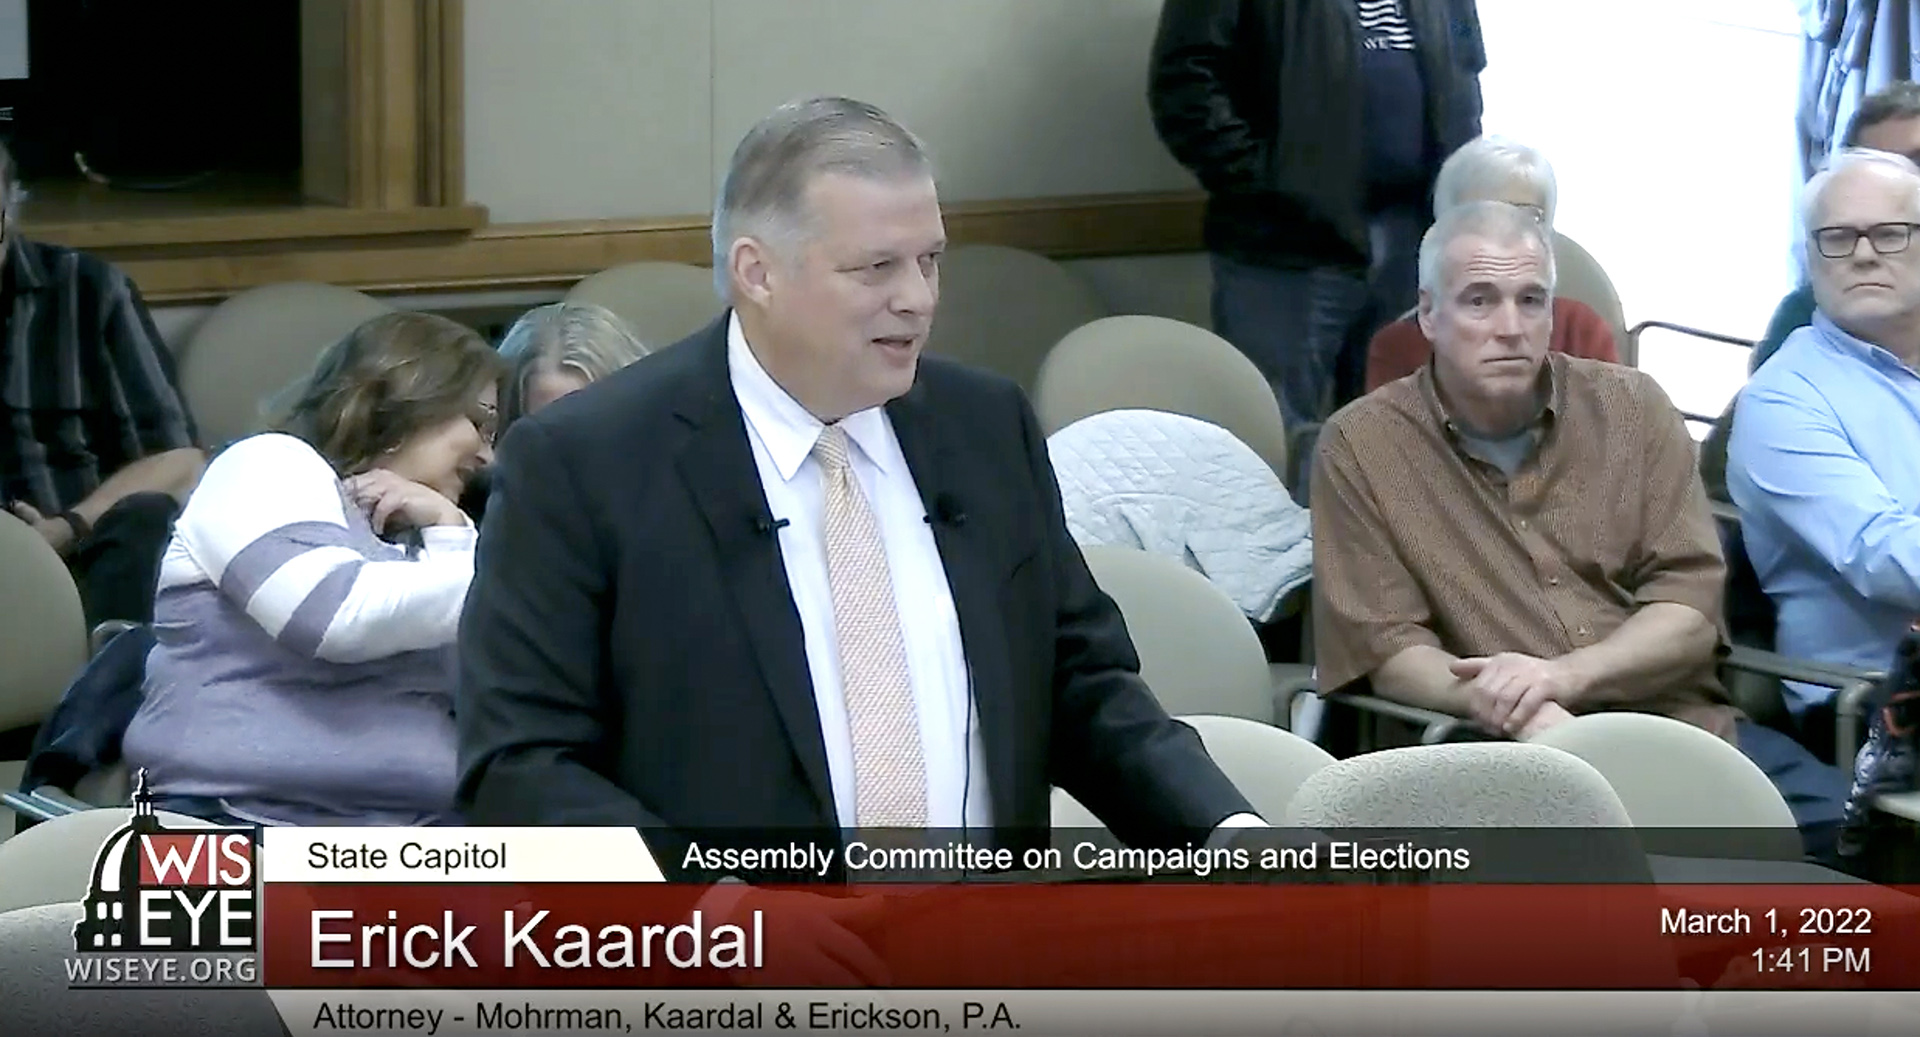 A screenshot shows Erick Kaardal speaking in front of a podium in a legislative hearing room, with observers seated in the background.